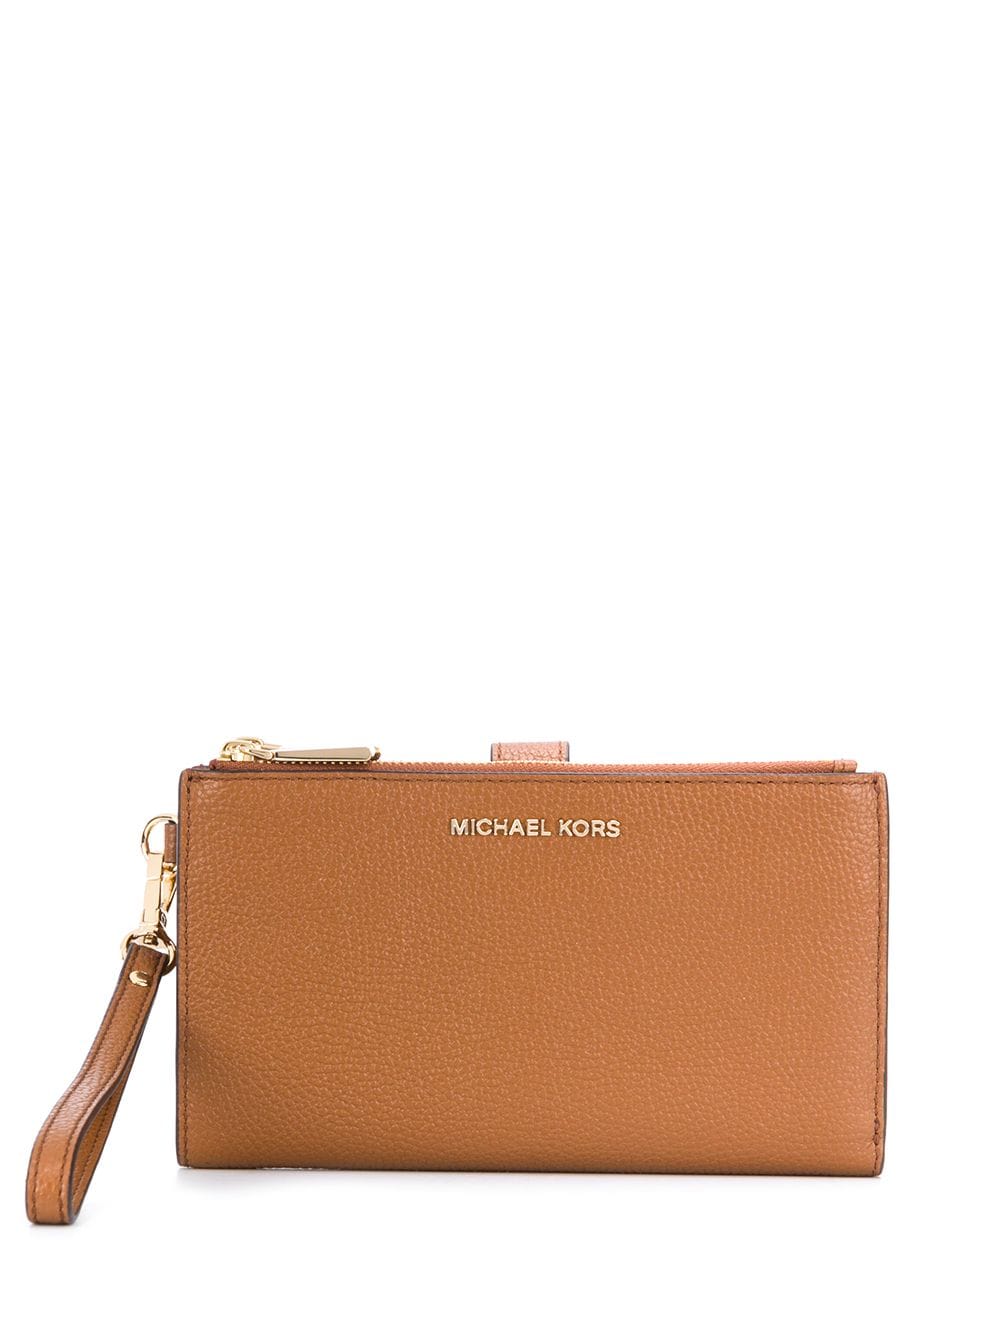 MMK Wallets Leather Brown